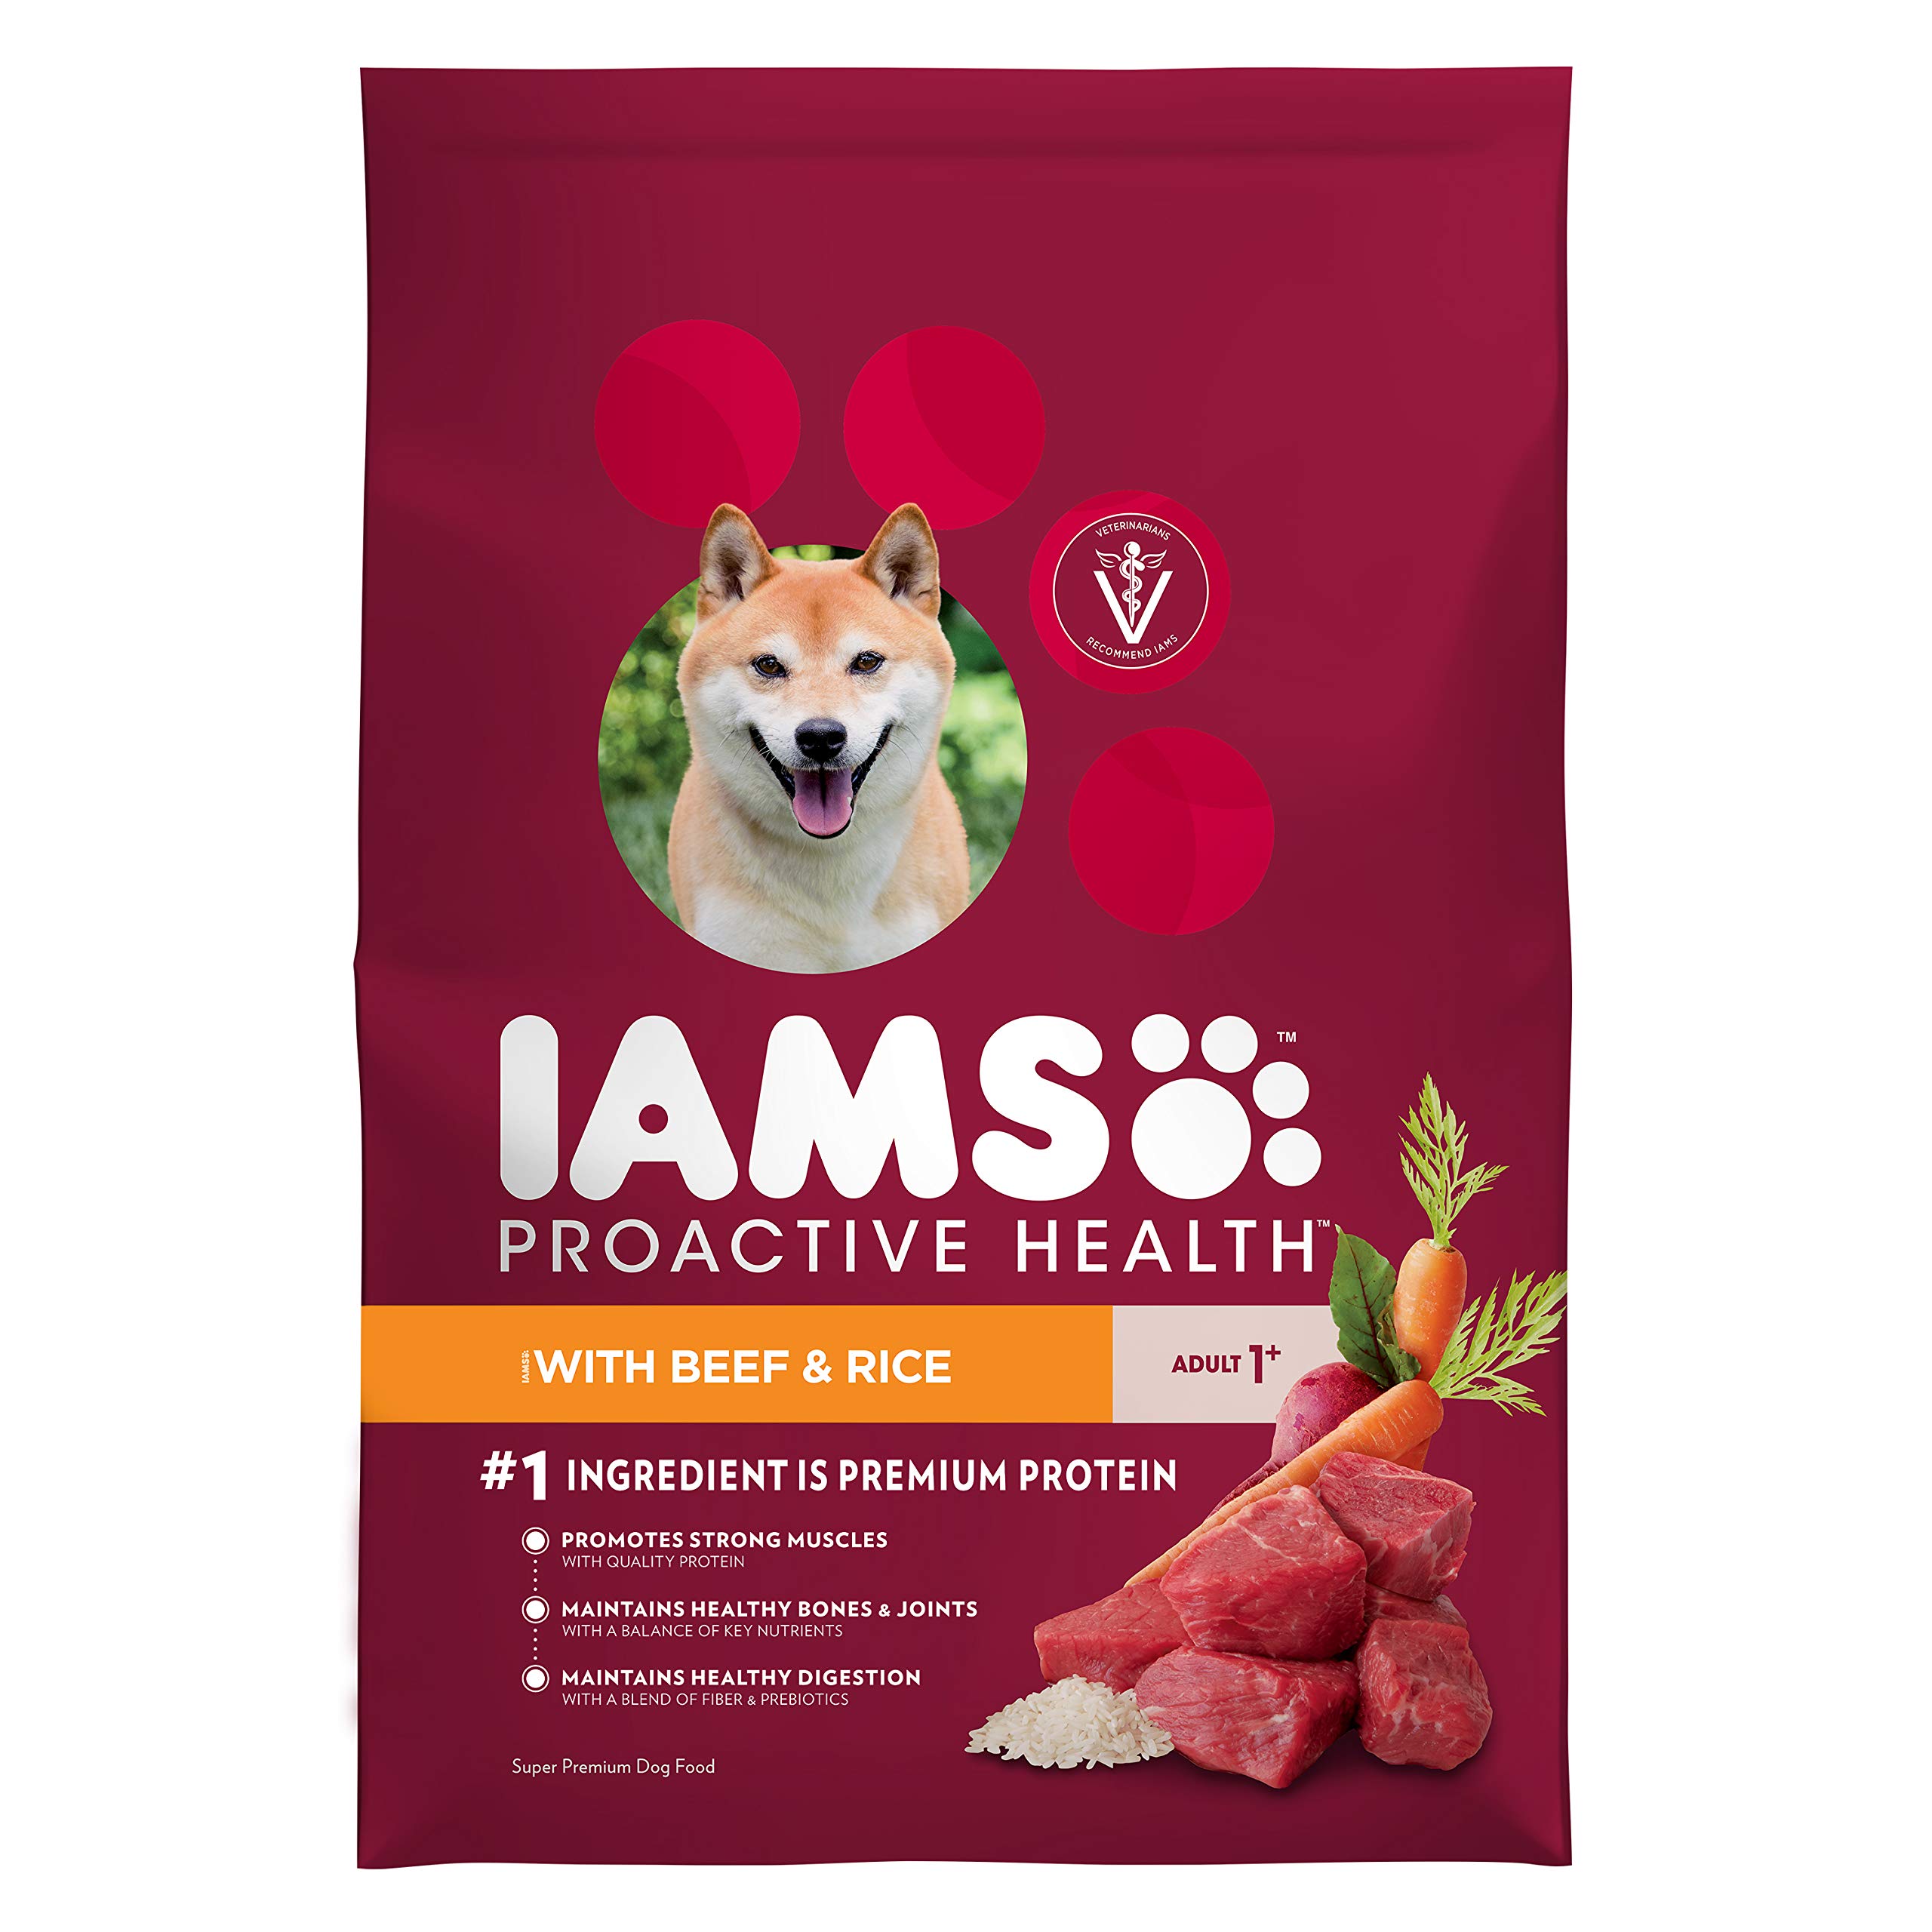 Book Cover DISCONTINUED BY MANUFACTURER:IAMS PROACTIVE HEALTH Adult High Protein Dry Dog Food with Beef and Rice, 30 lb. Bag